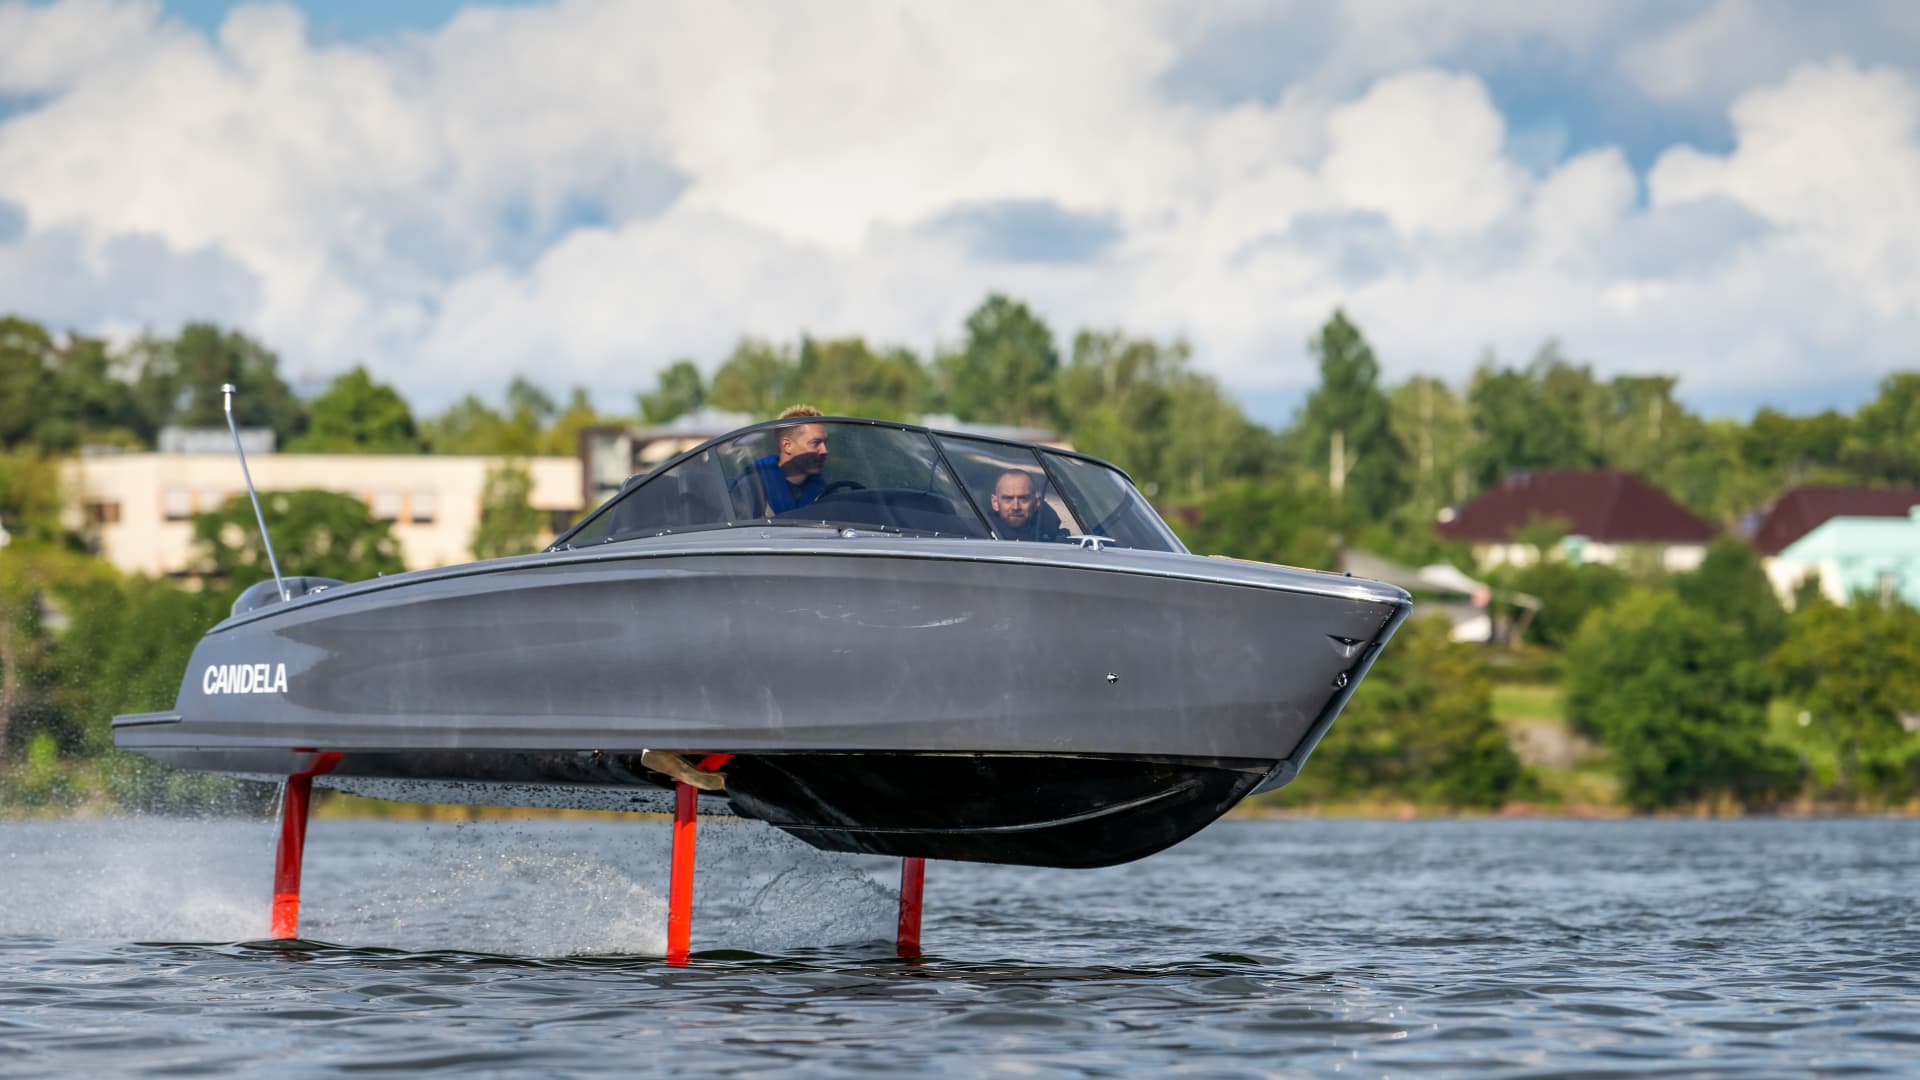 Polestar to provide batteries for electric boats that ‘fly’ over water